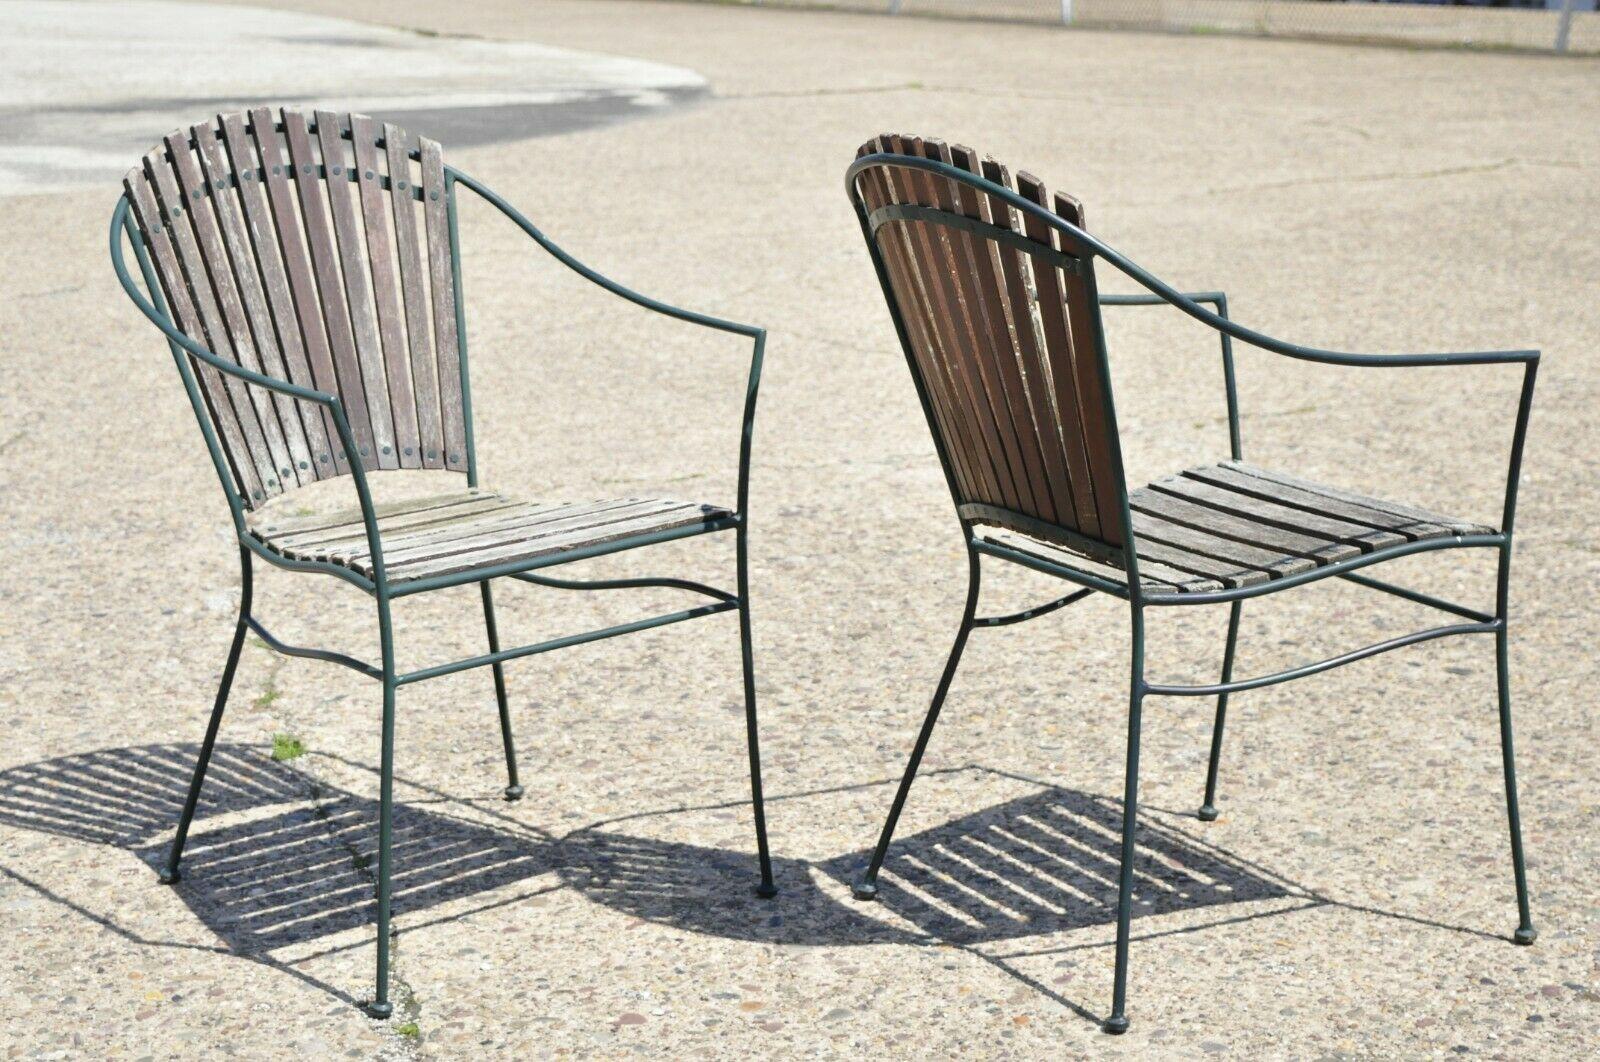 Vintage Wrought Iron and Wood Slat Garden Patio Dining Arm Chairs - Set of 4 7